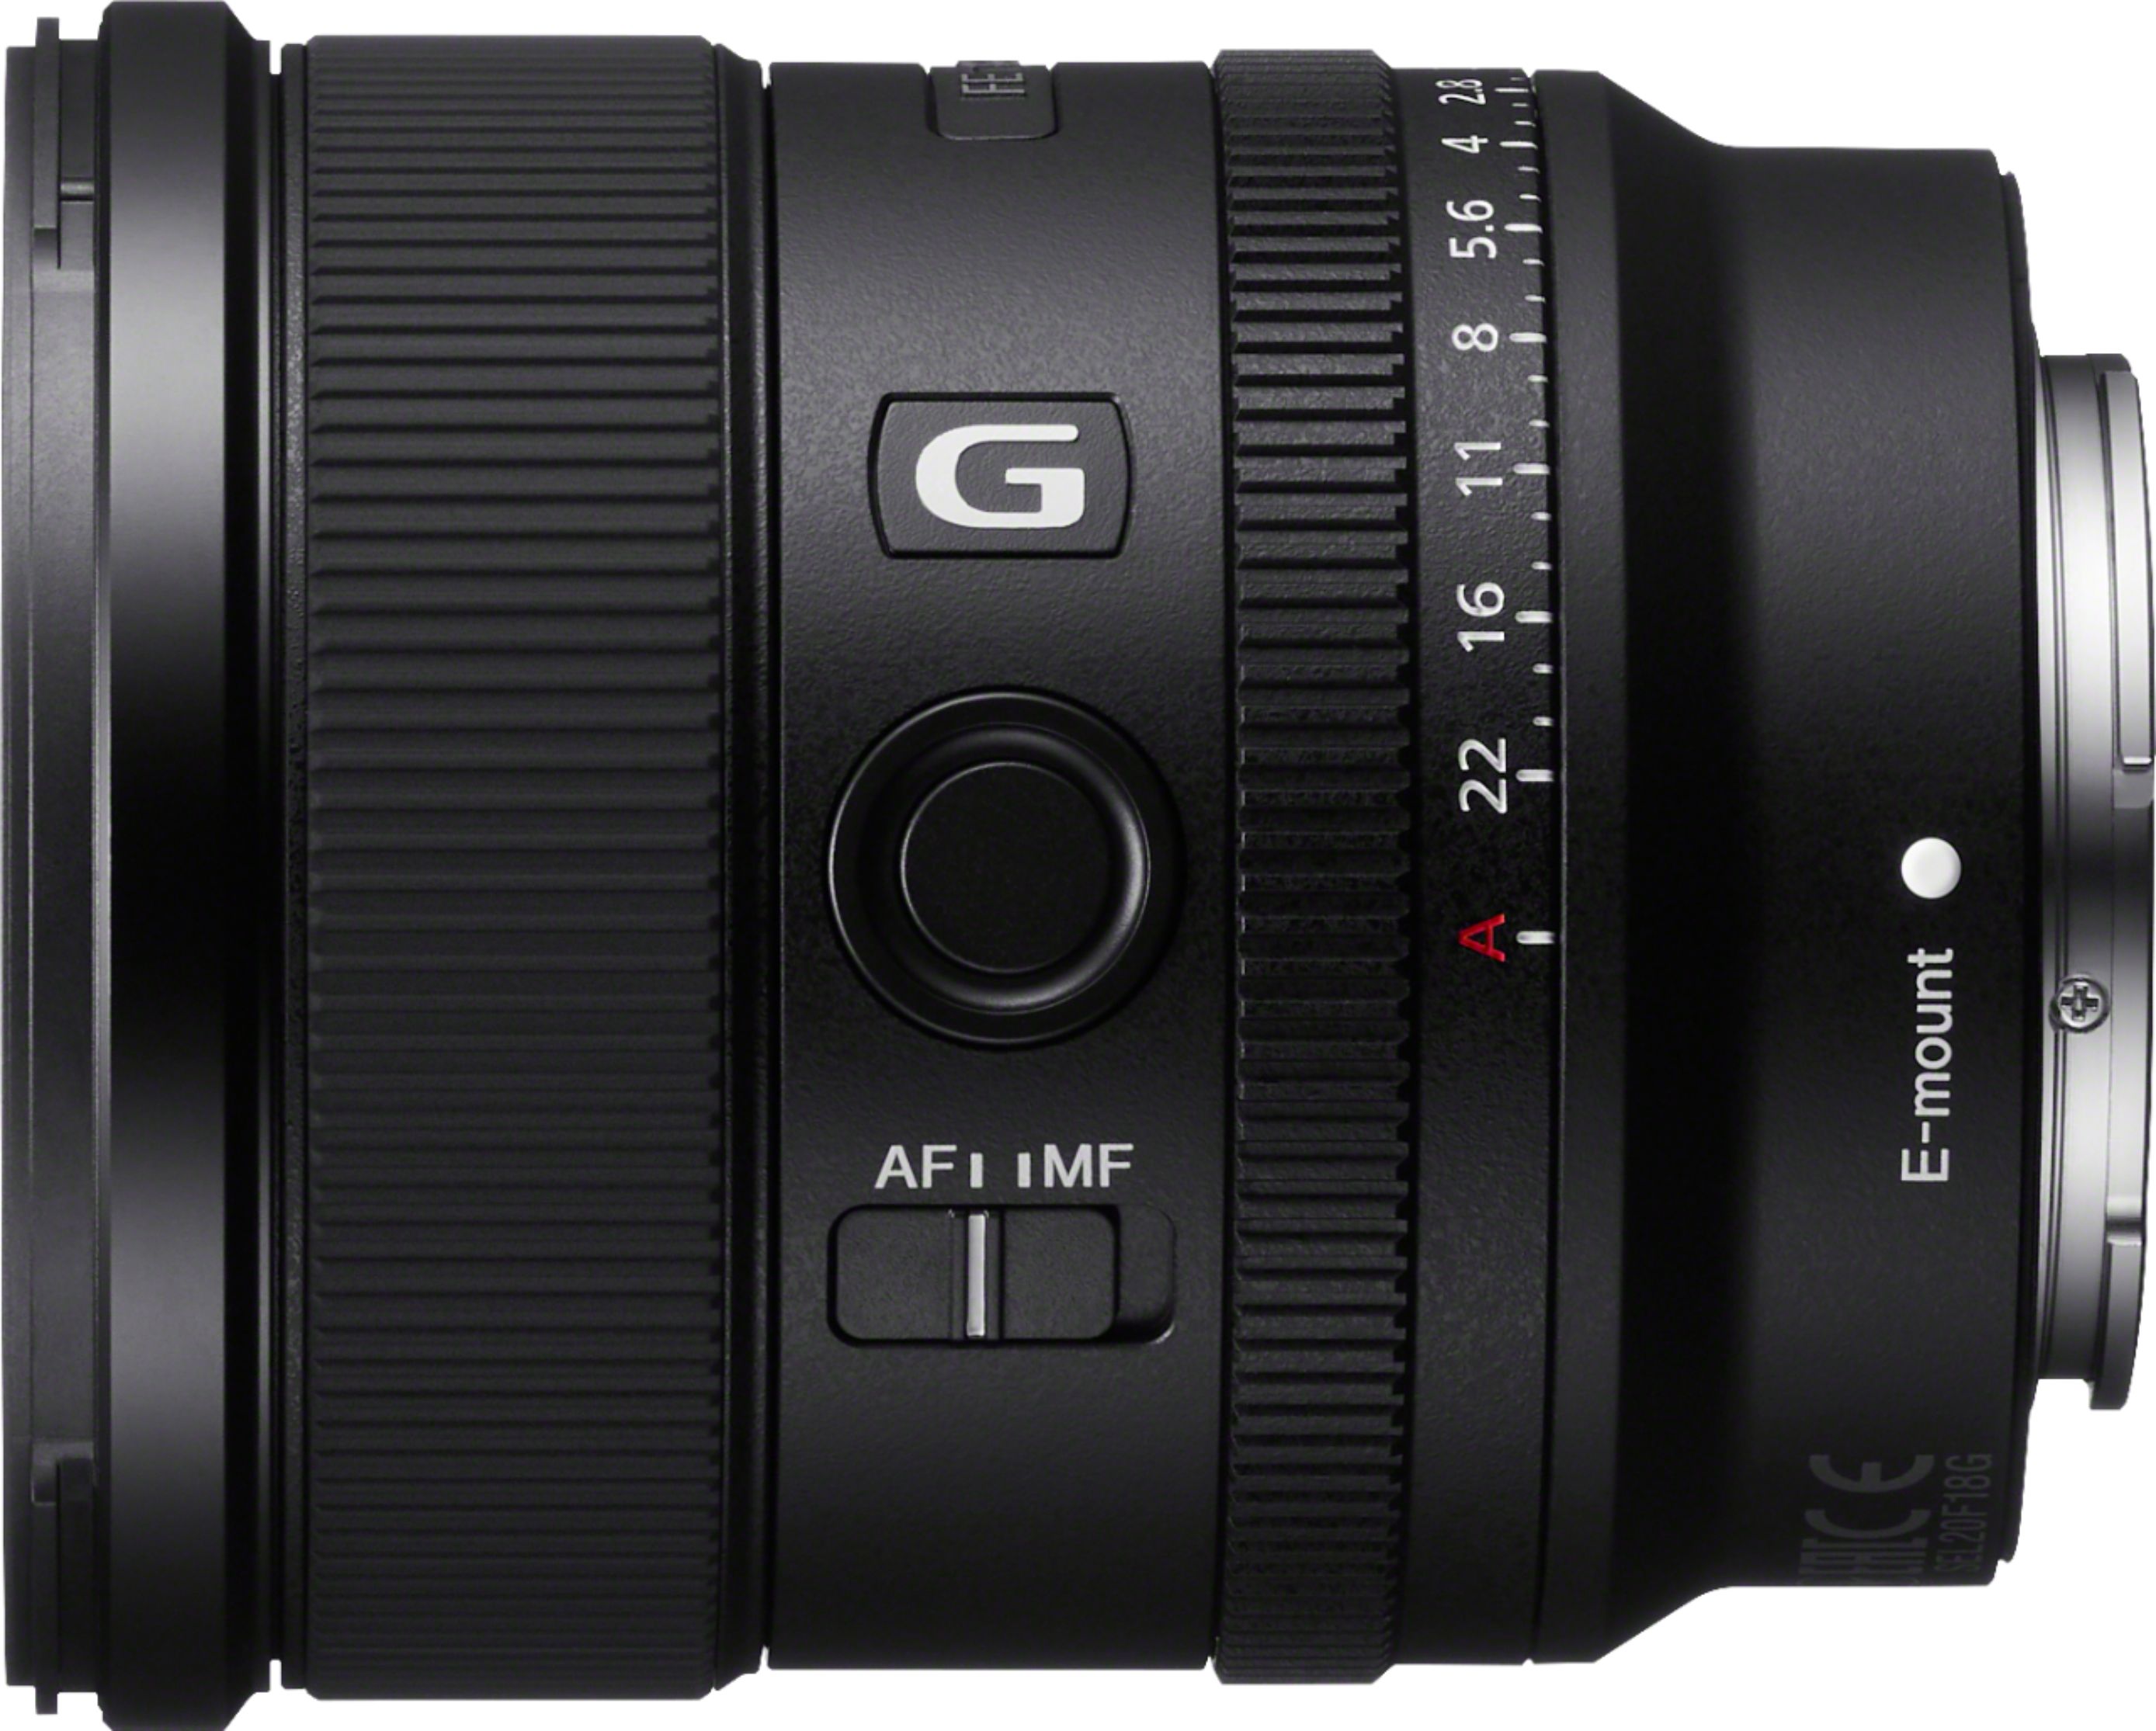 Left View: Sony - FE 20mm f/1.8 G Ultra Wide Angle Prime Lens for E-mount Cameras - Black